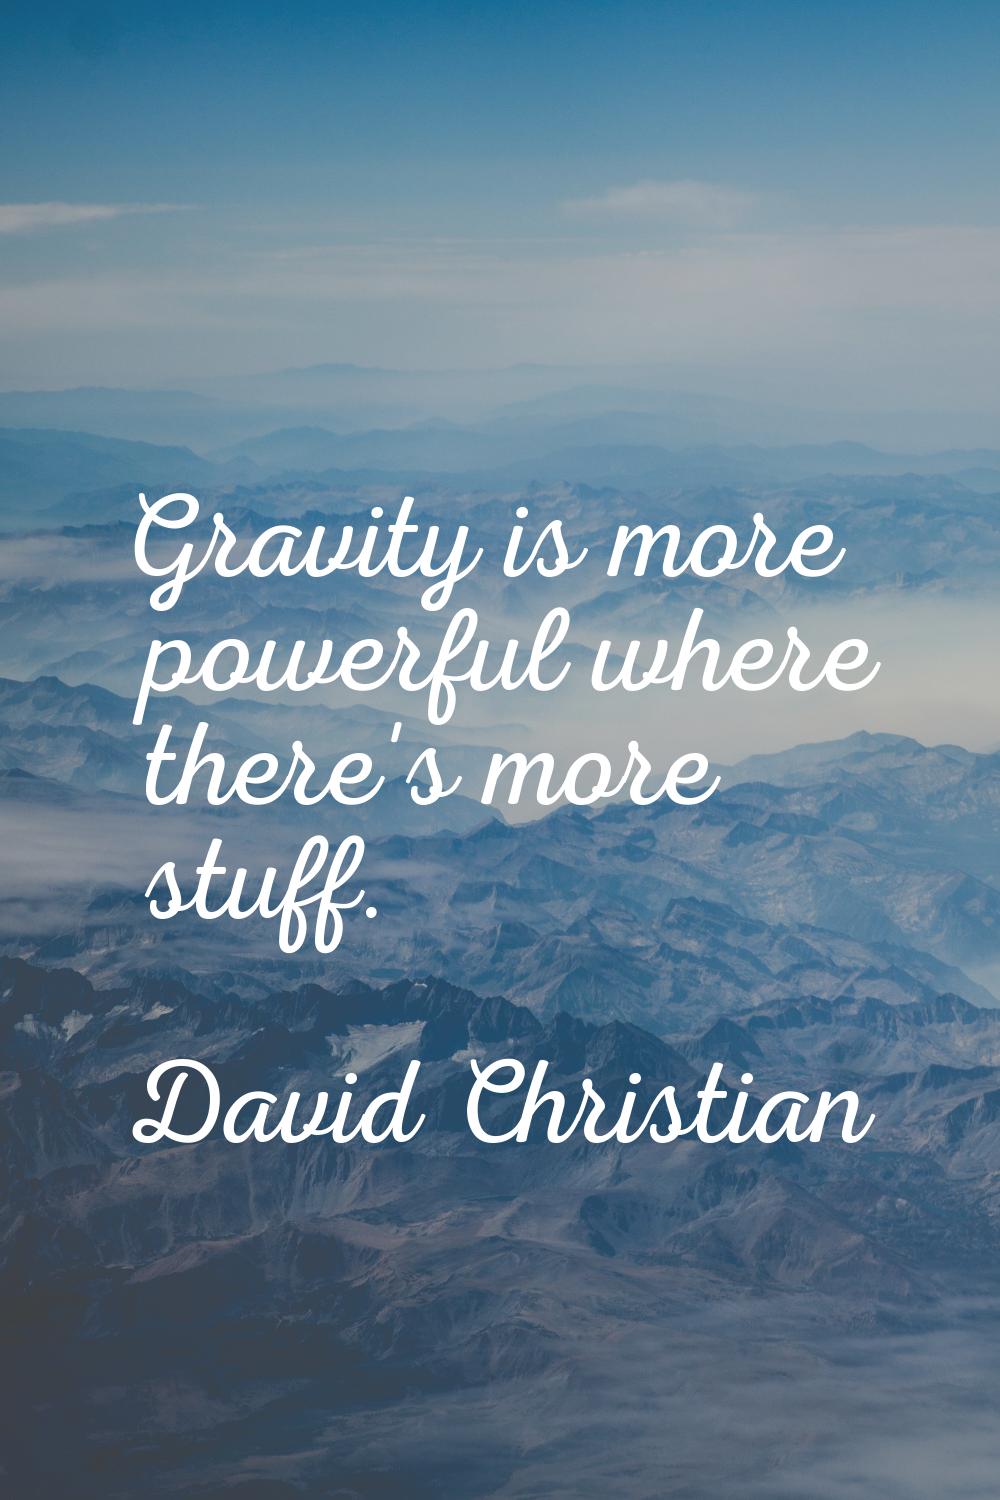 Gravity is more powerful where there's more stuff.